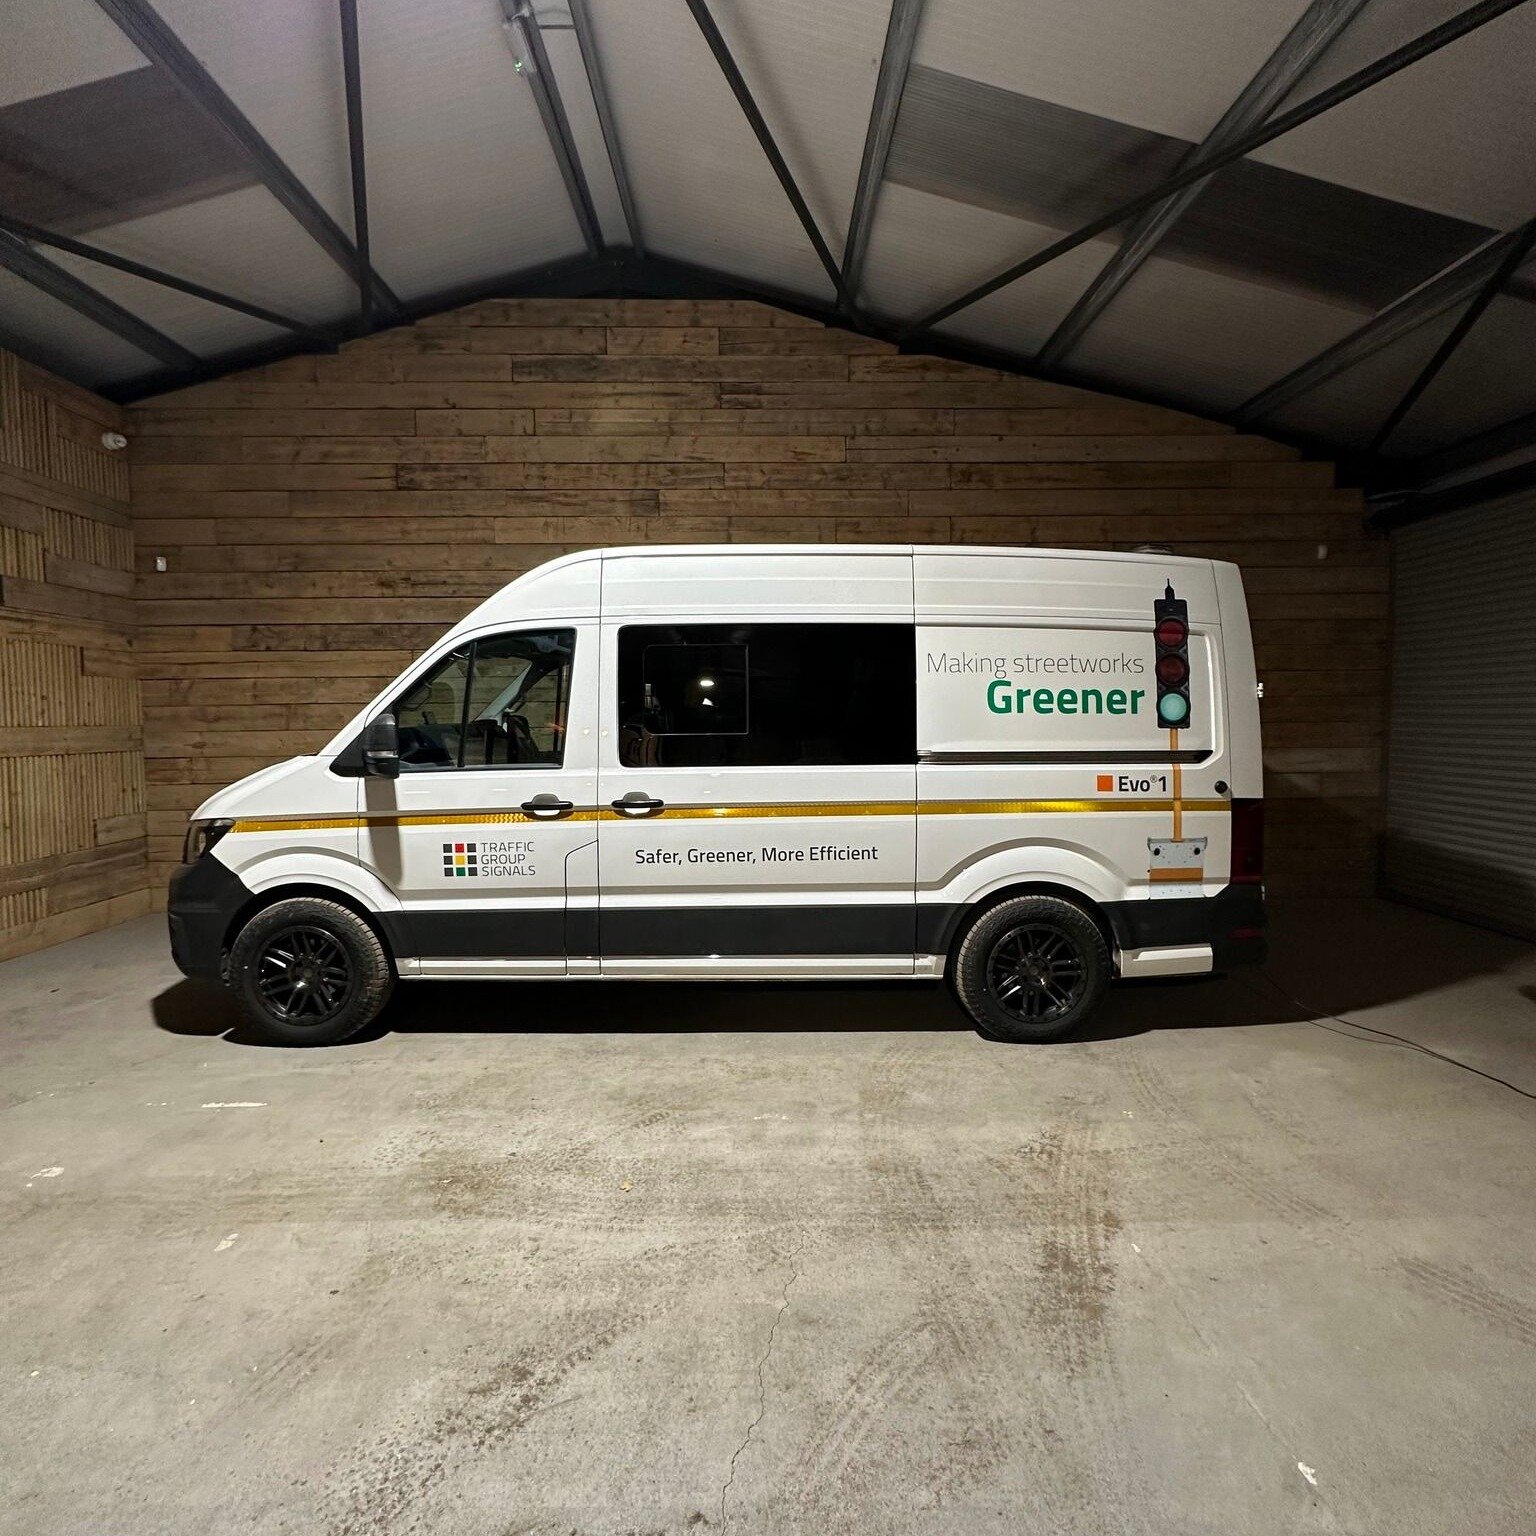 Check out this epic build we have built for Traffic Group Signals 

The Ultimate work van and a Simply Surf Bus Original! 

Controlling traffic around the uk, while keeping the site safe and the staff warm.

Check out this post to see how happy the c